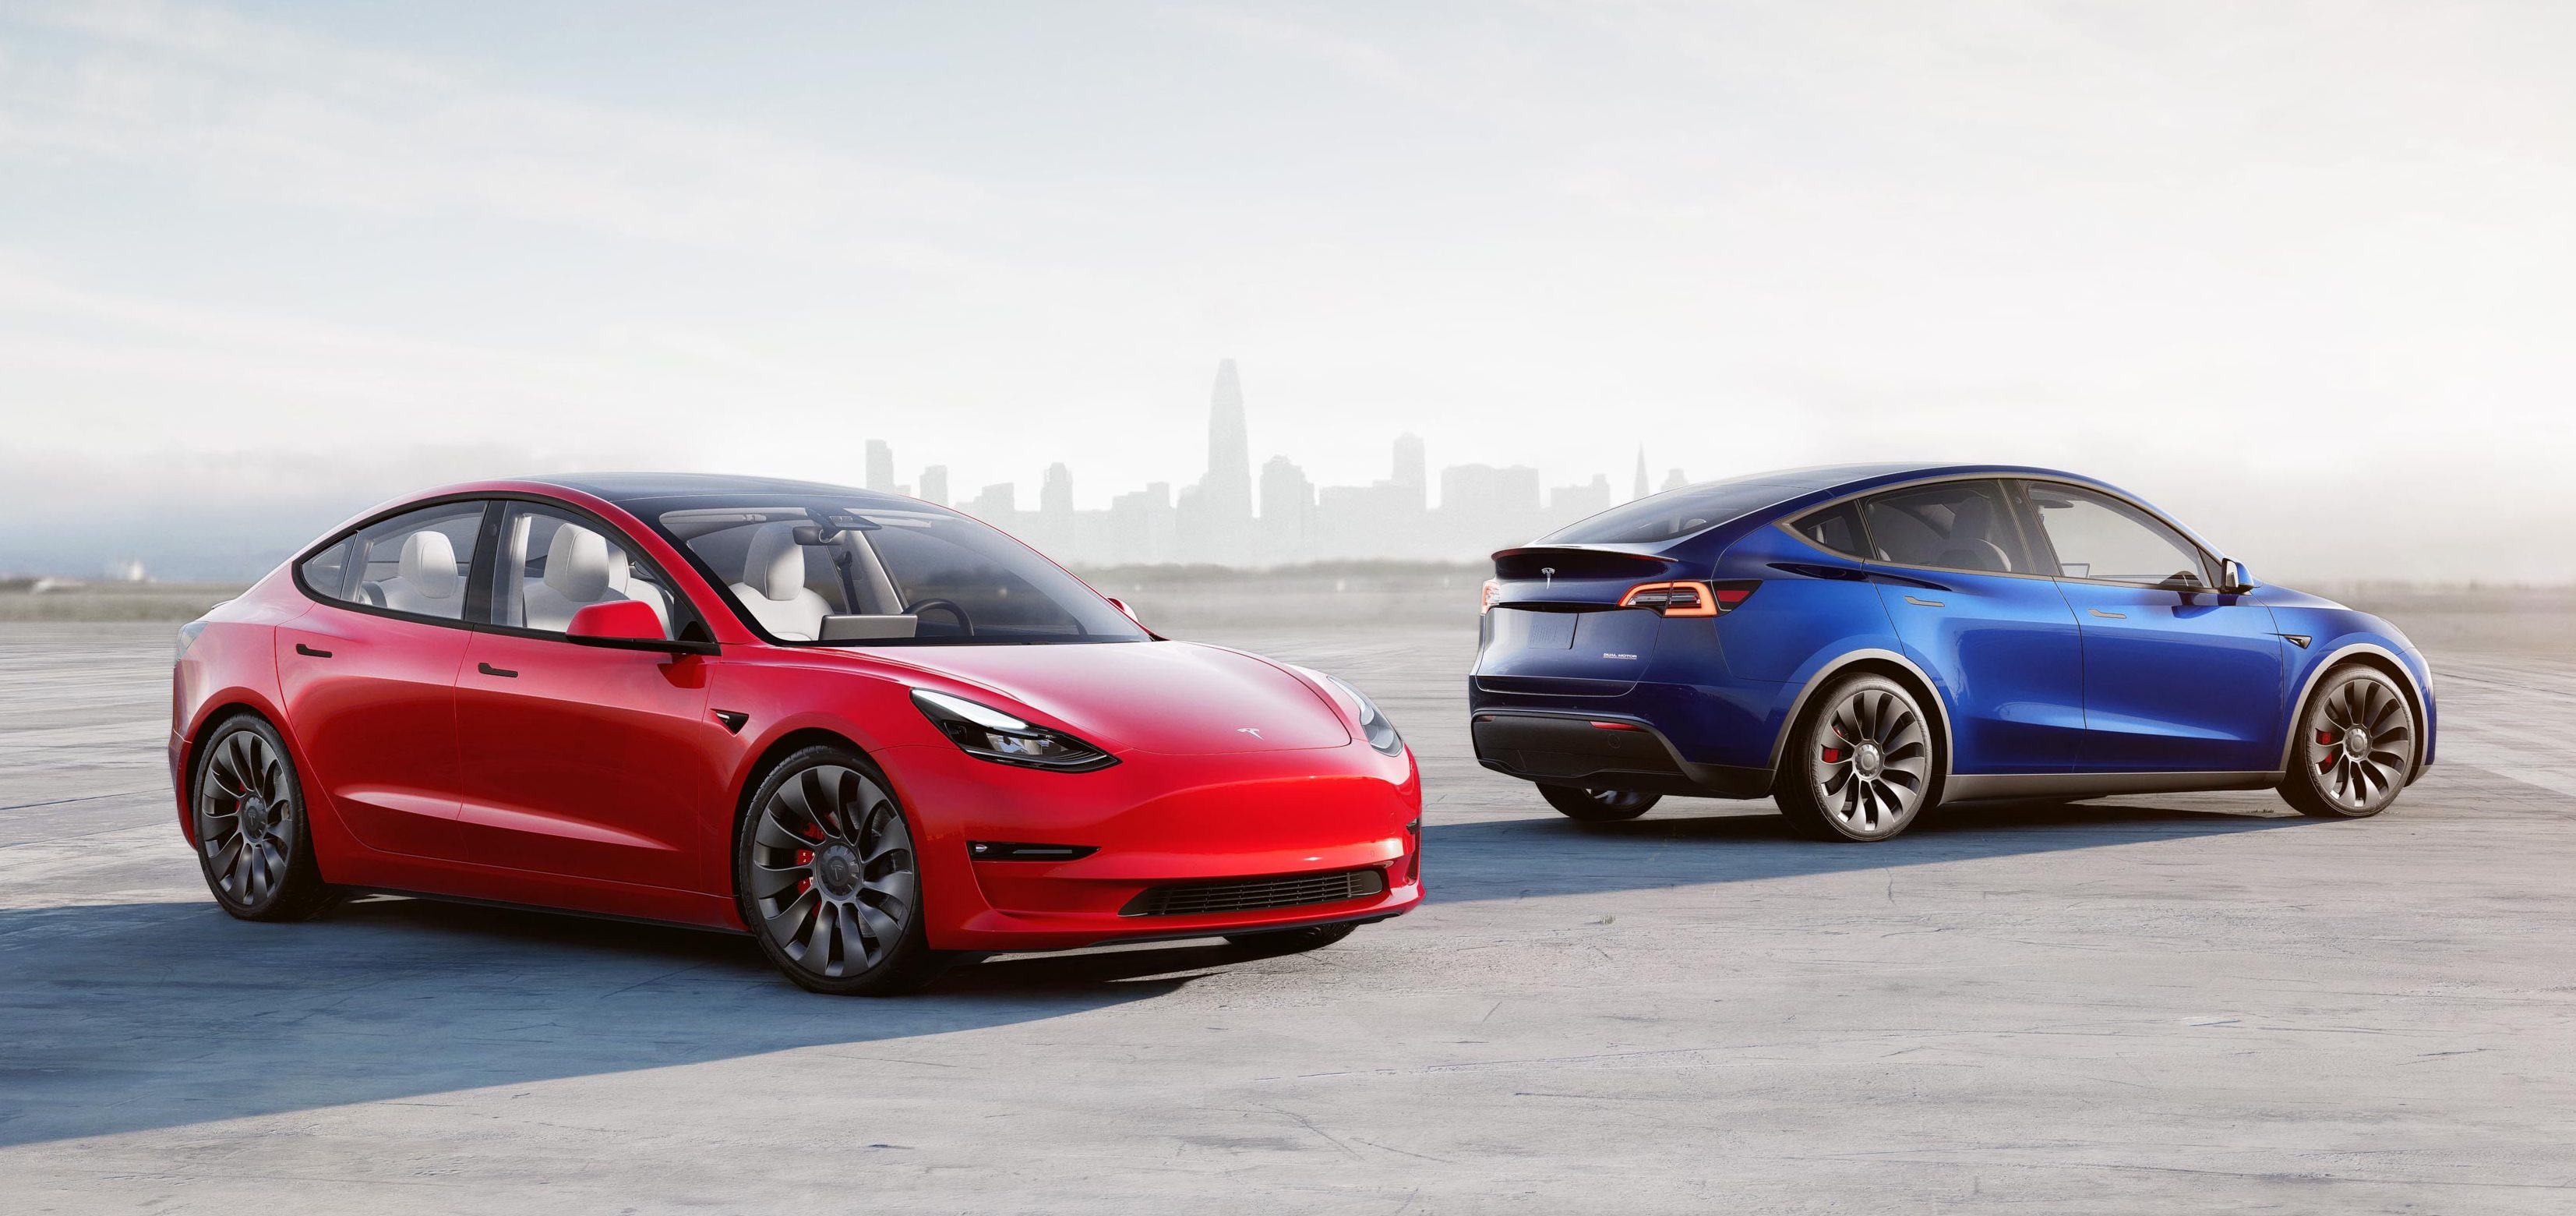 Tesla announces it will lose entire $7,500 tax credit on base Model 3 trims